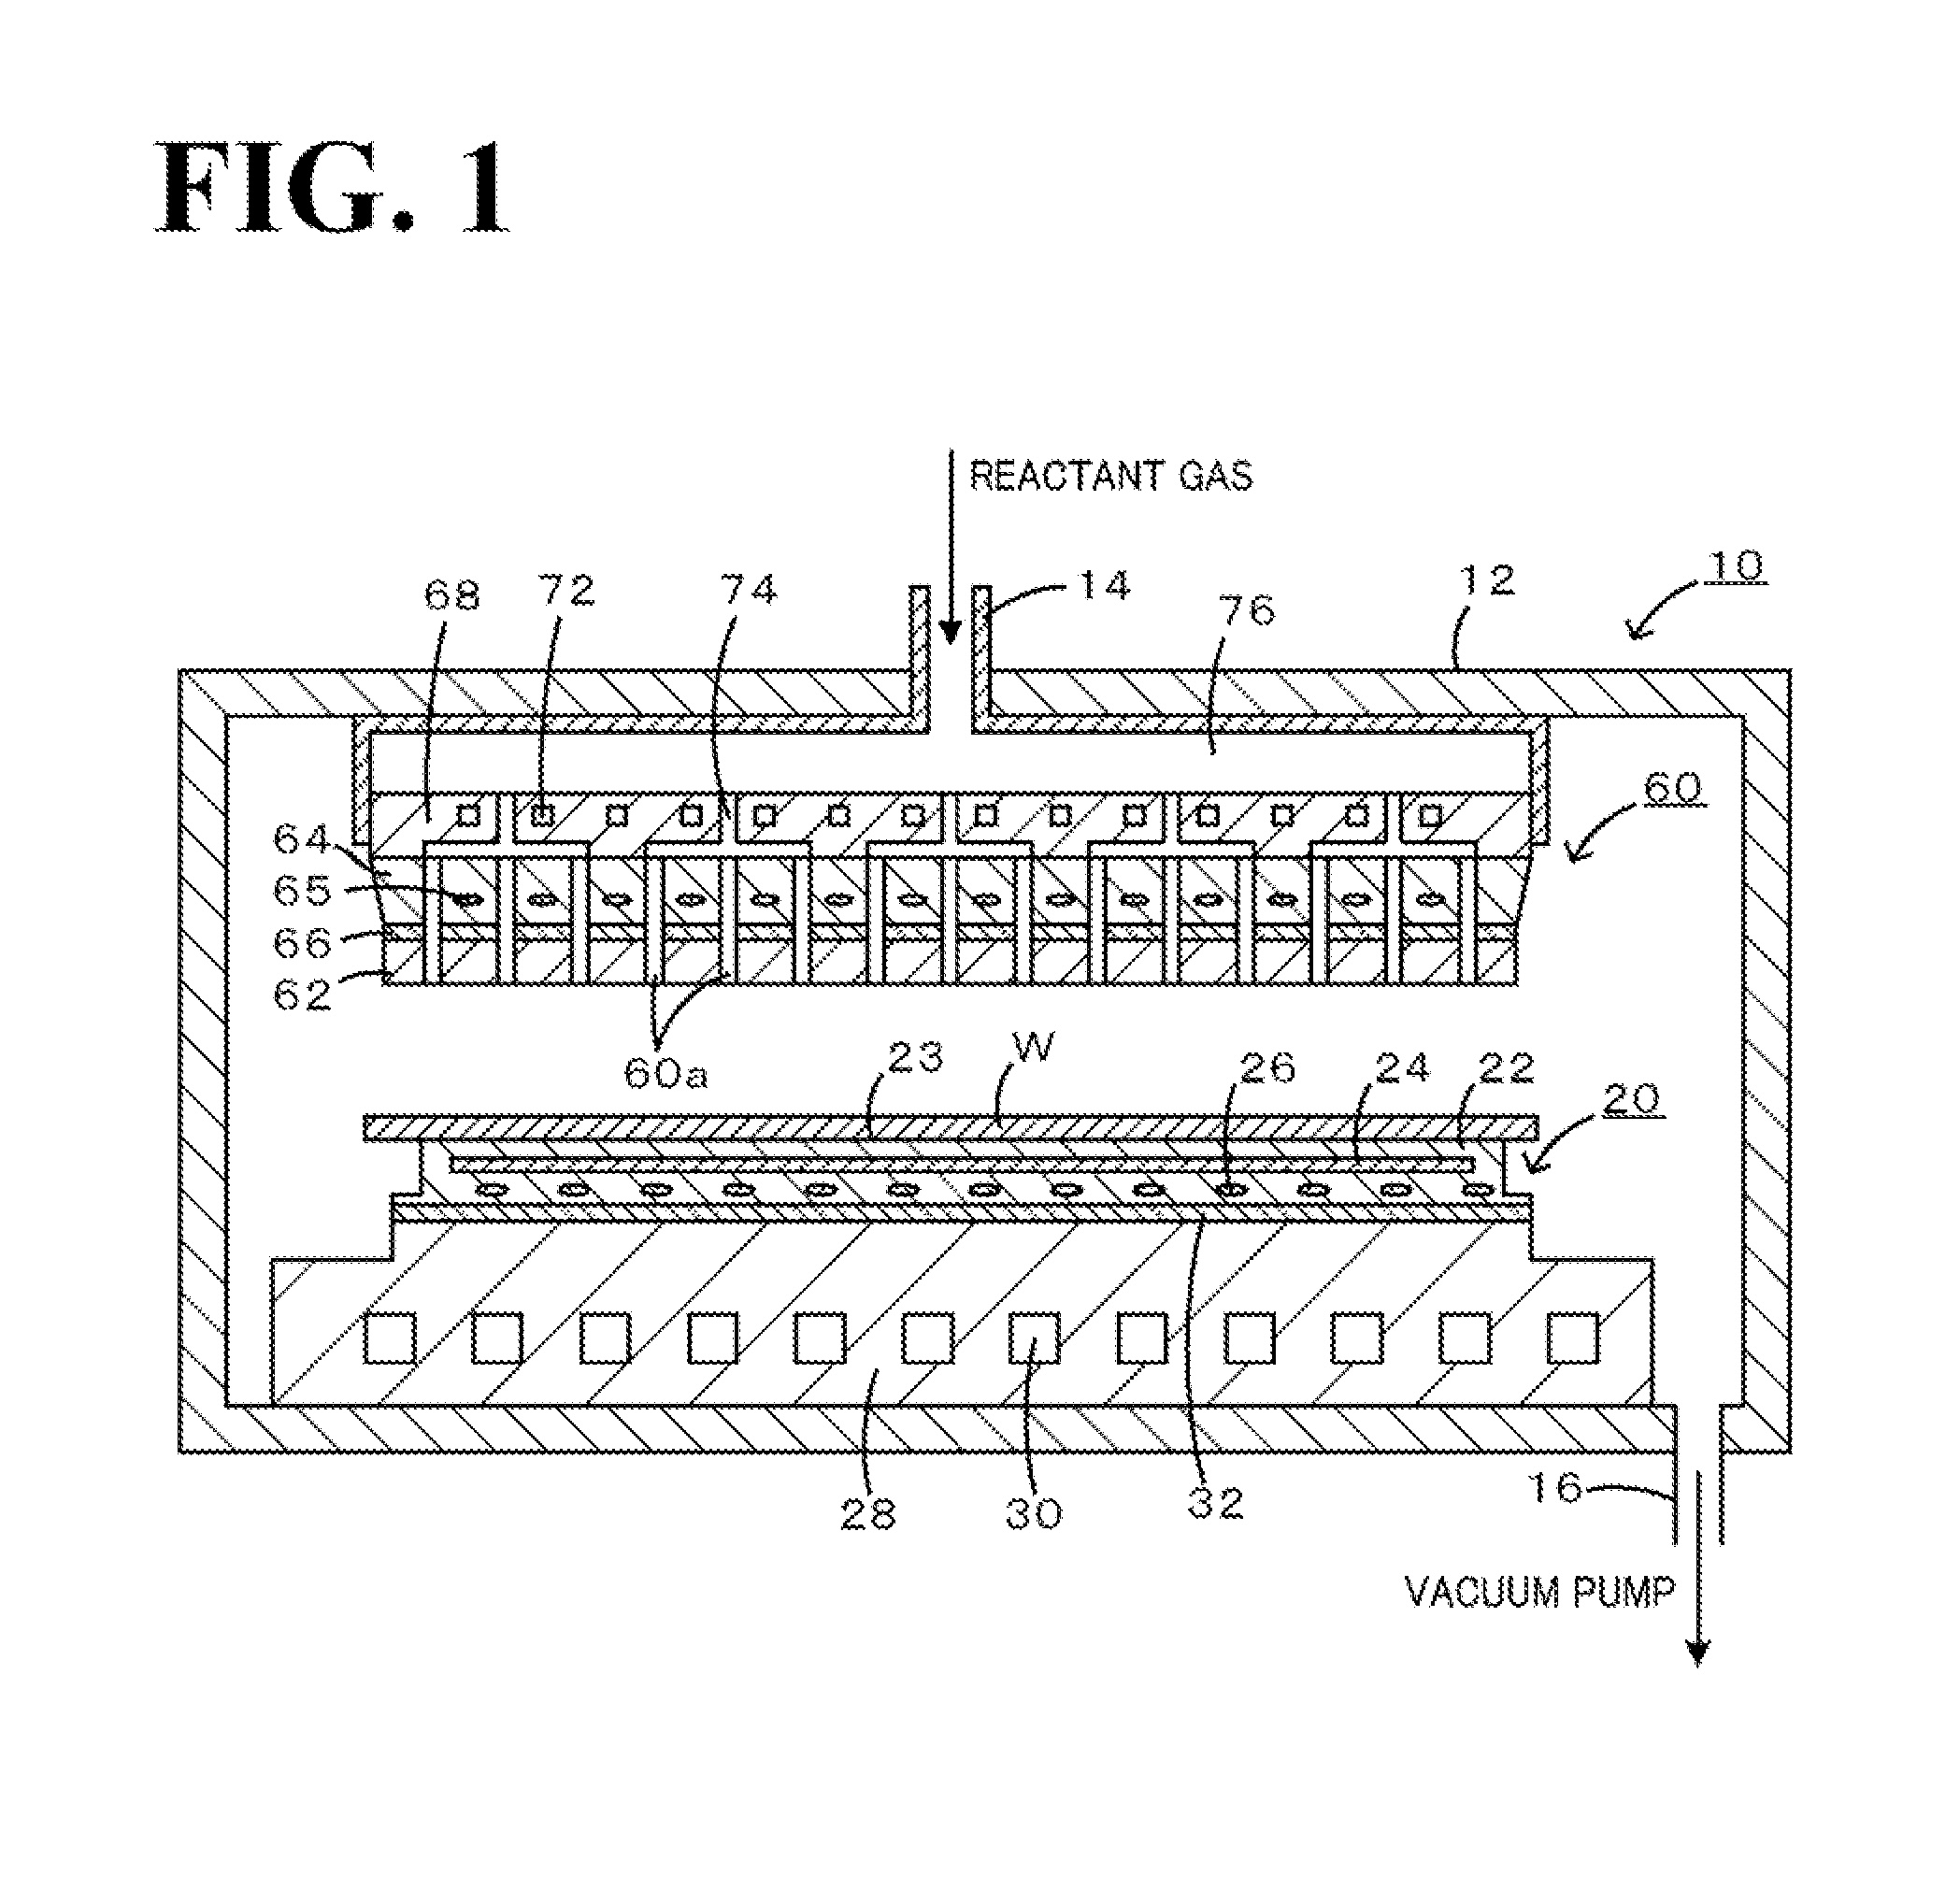 Ceramic-metal bonded body and method of producing the same